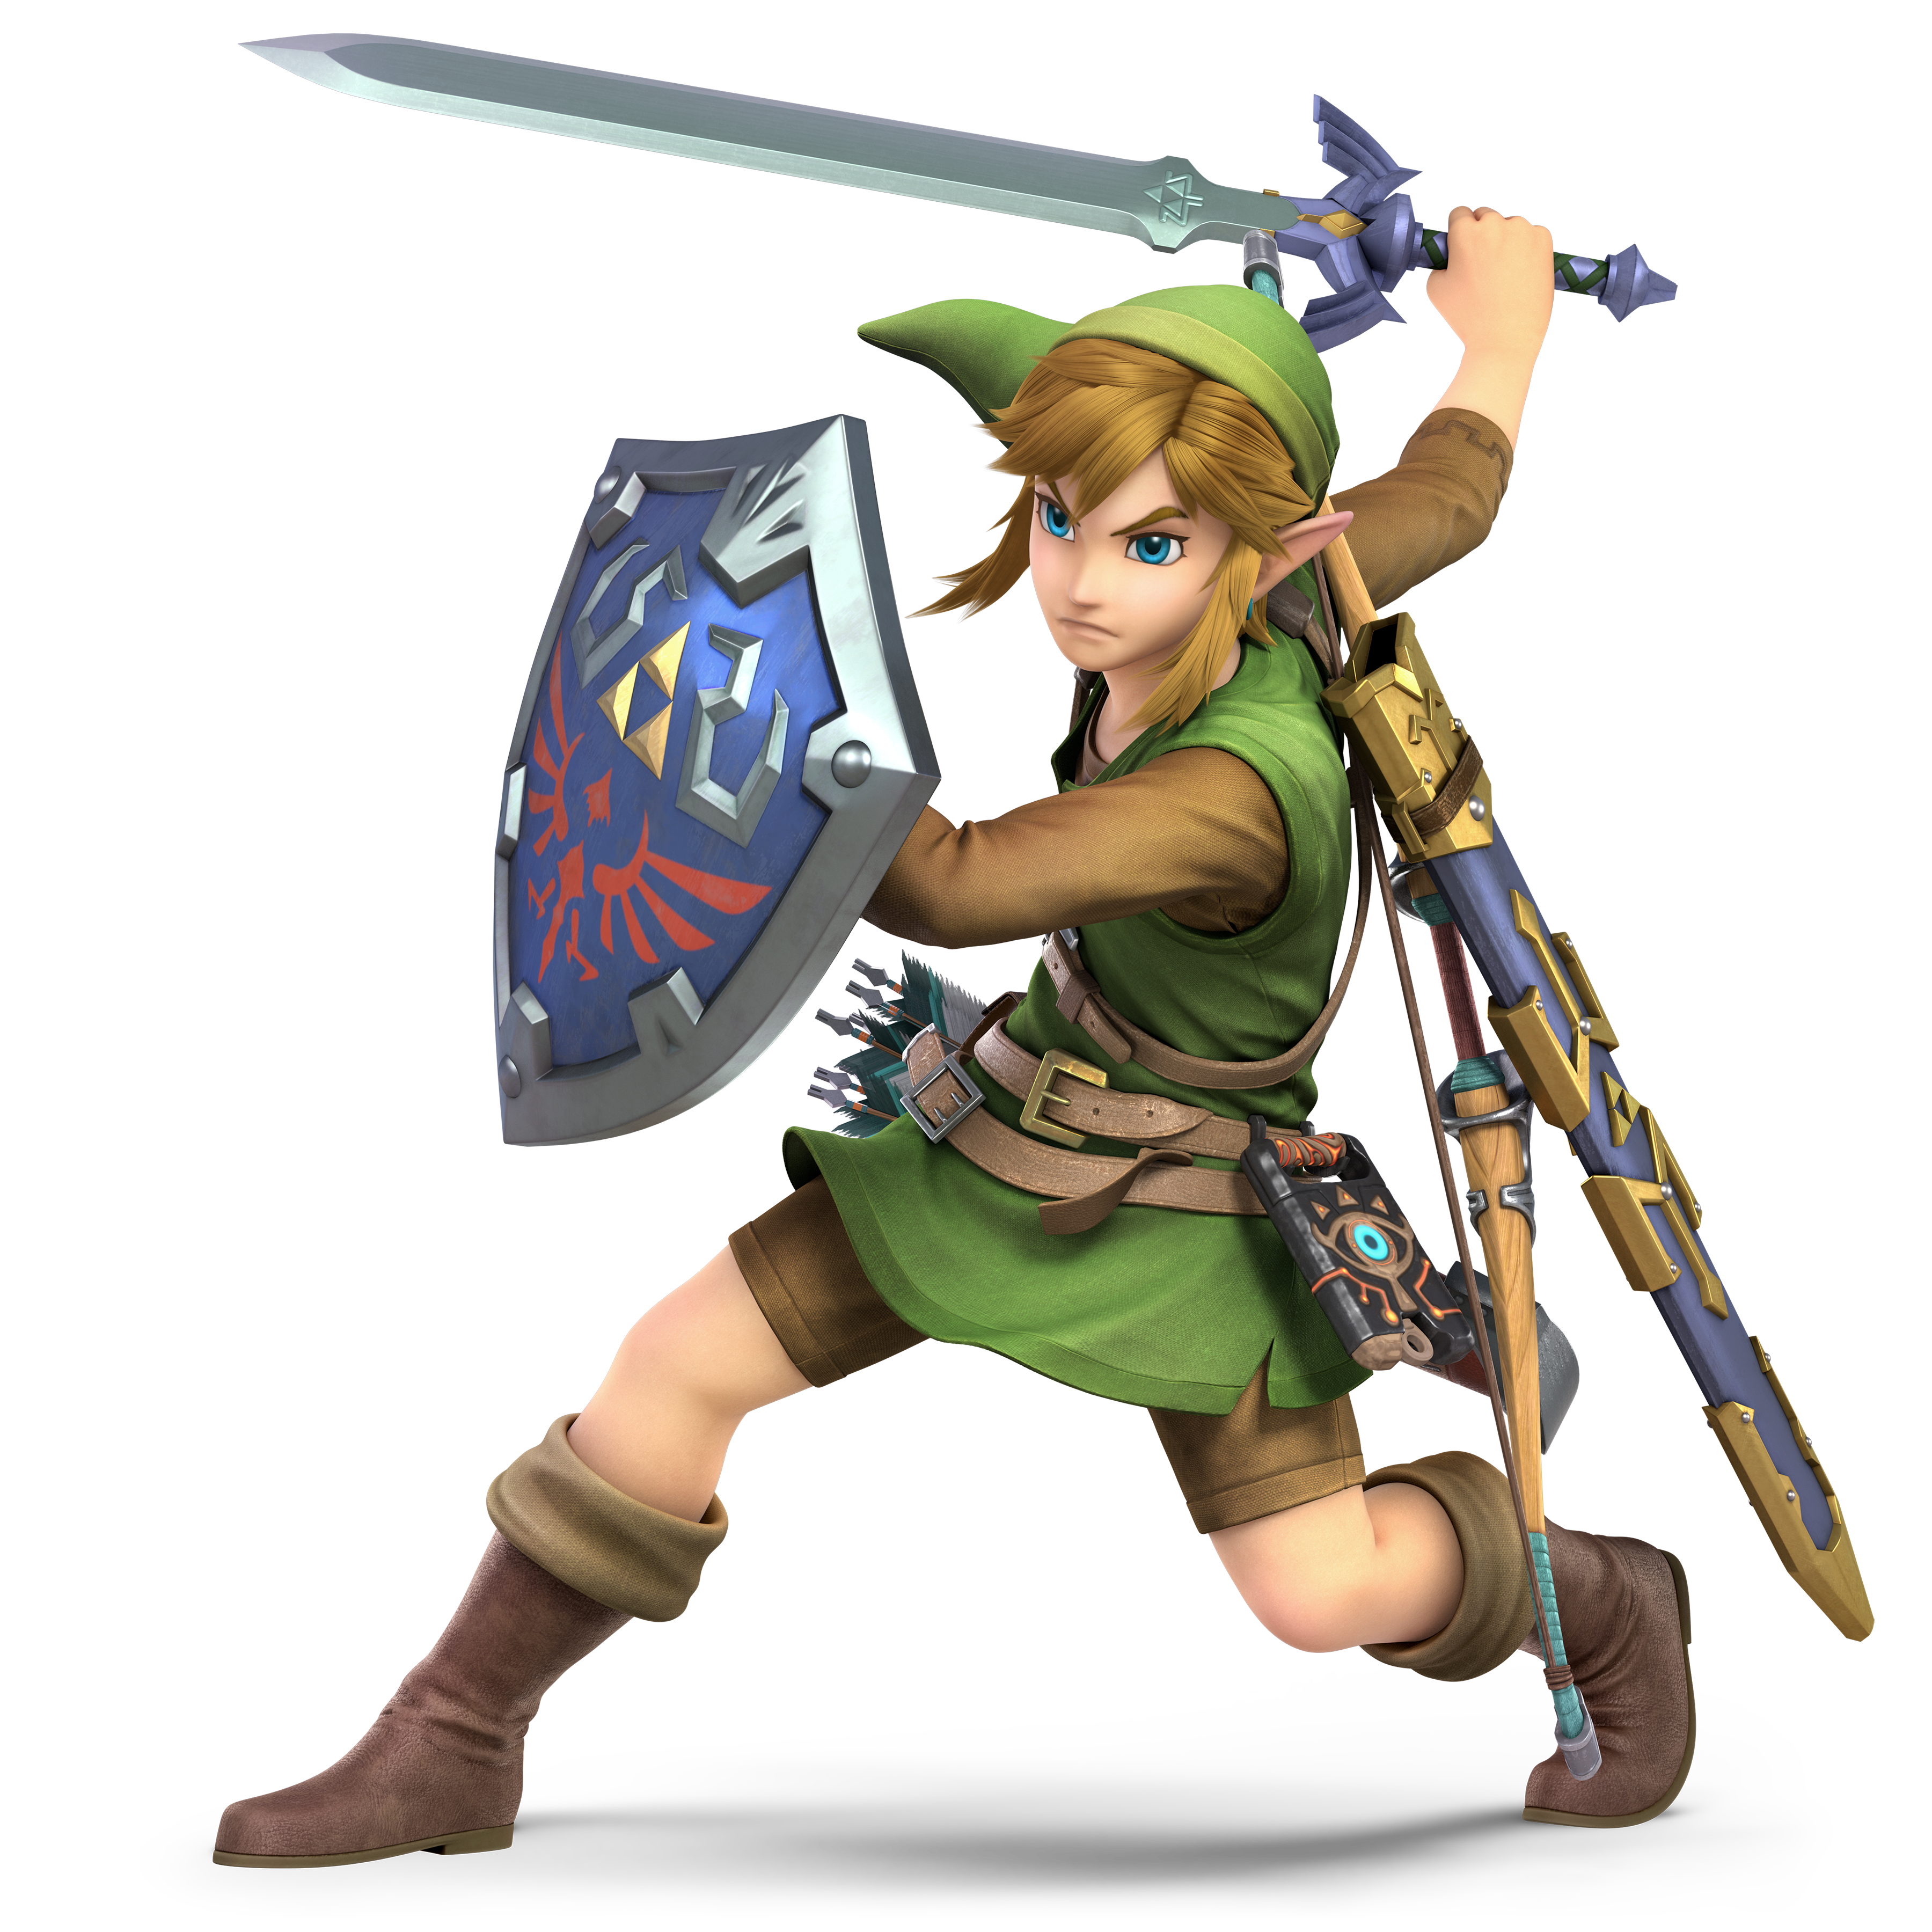 Super Picture Link Brothers Smash PNG Image